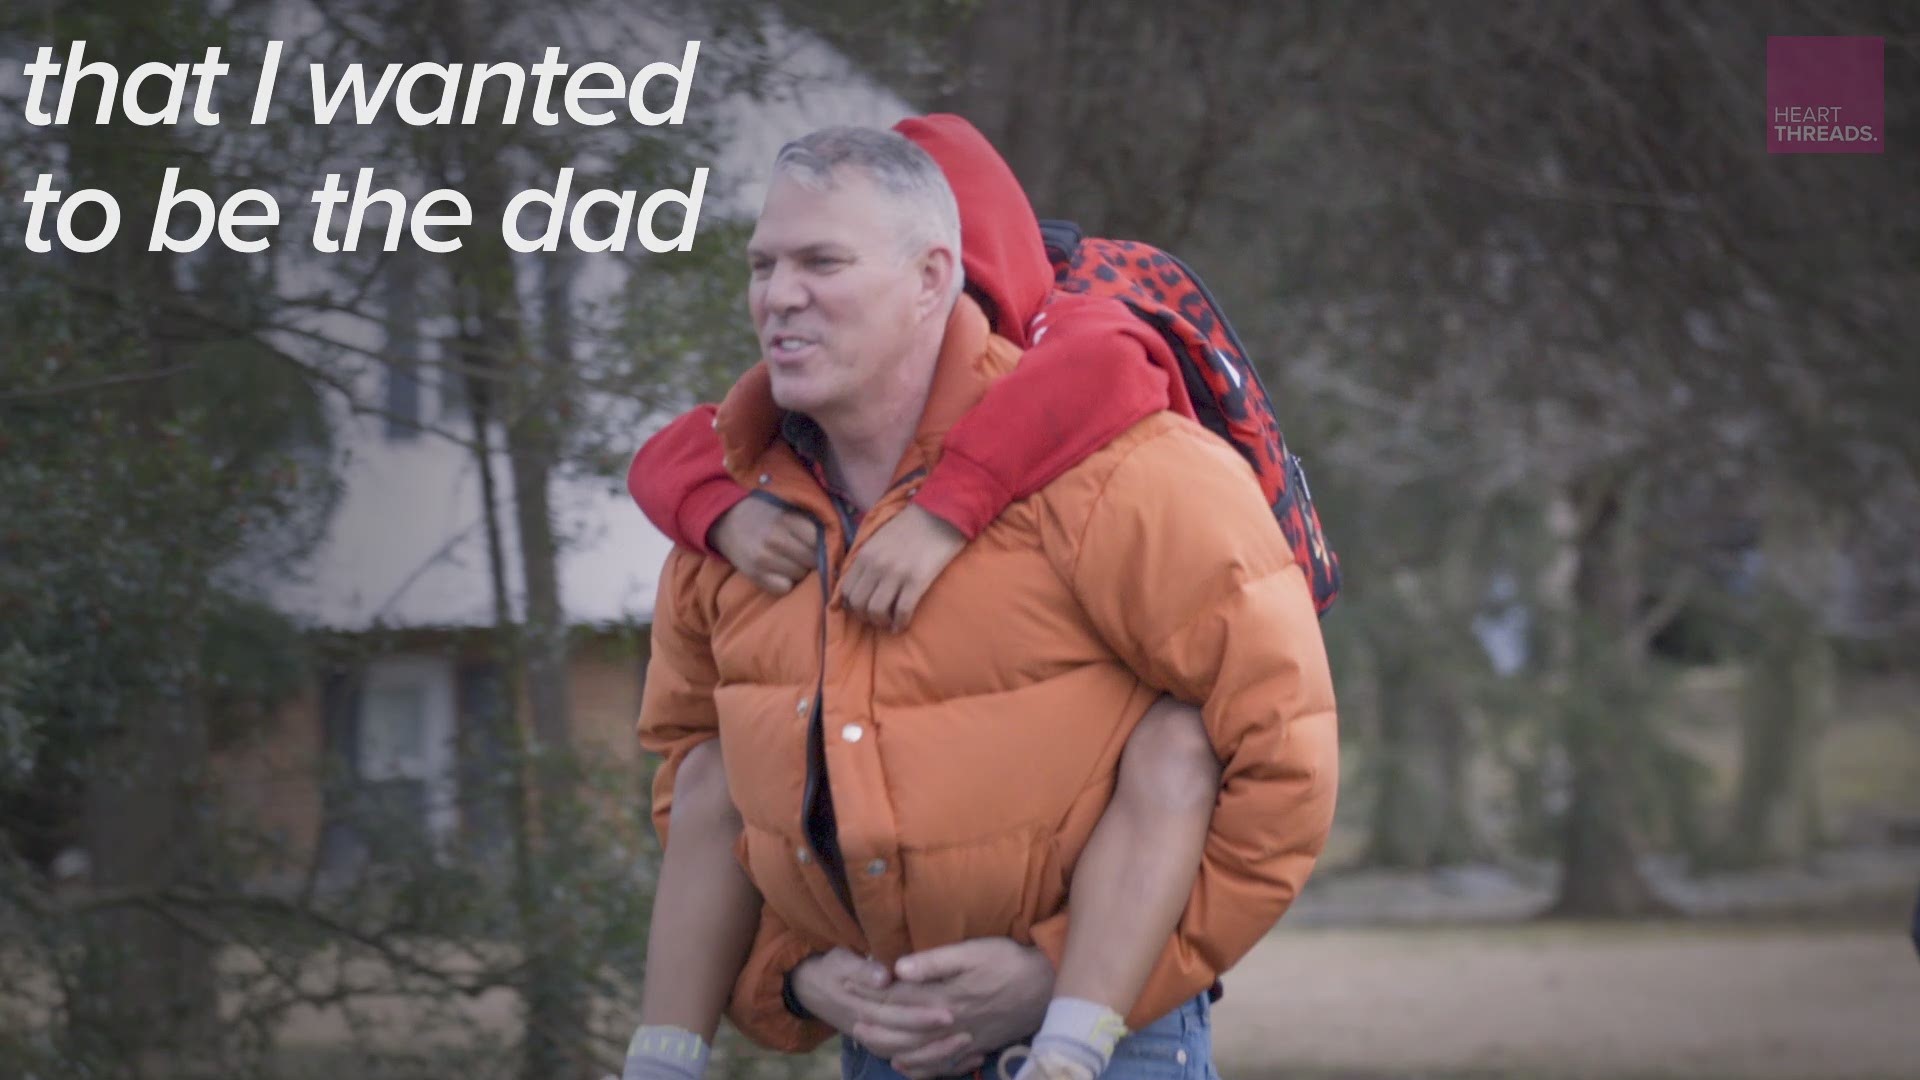 "I wanted to be the dad I never had."